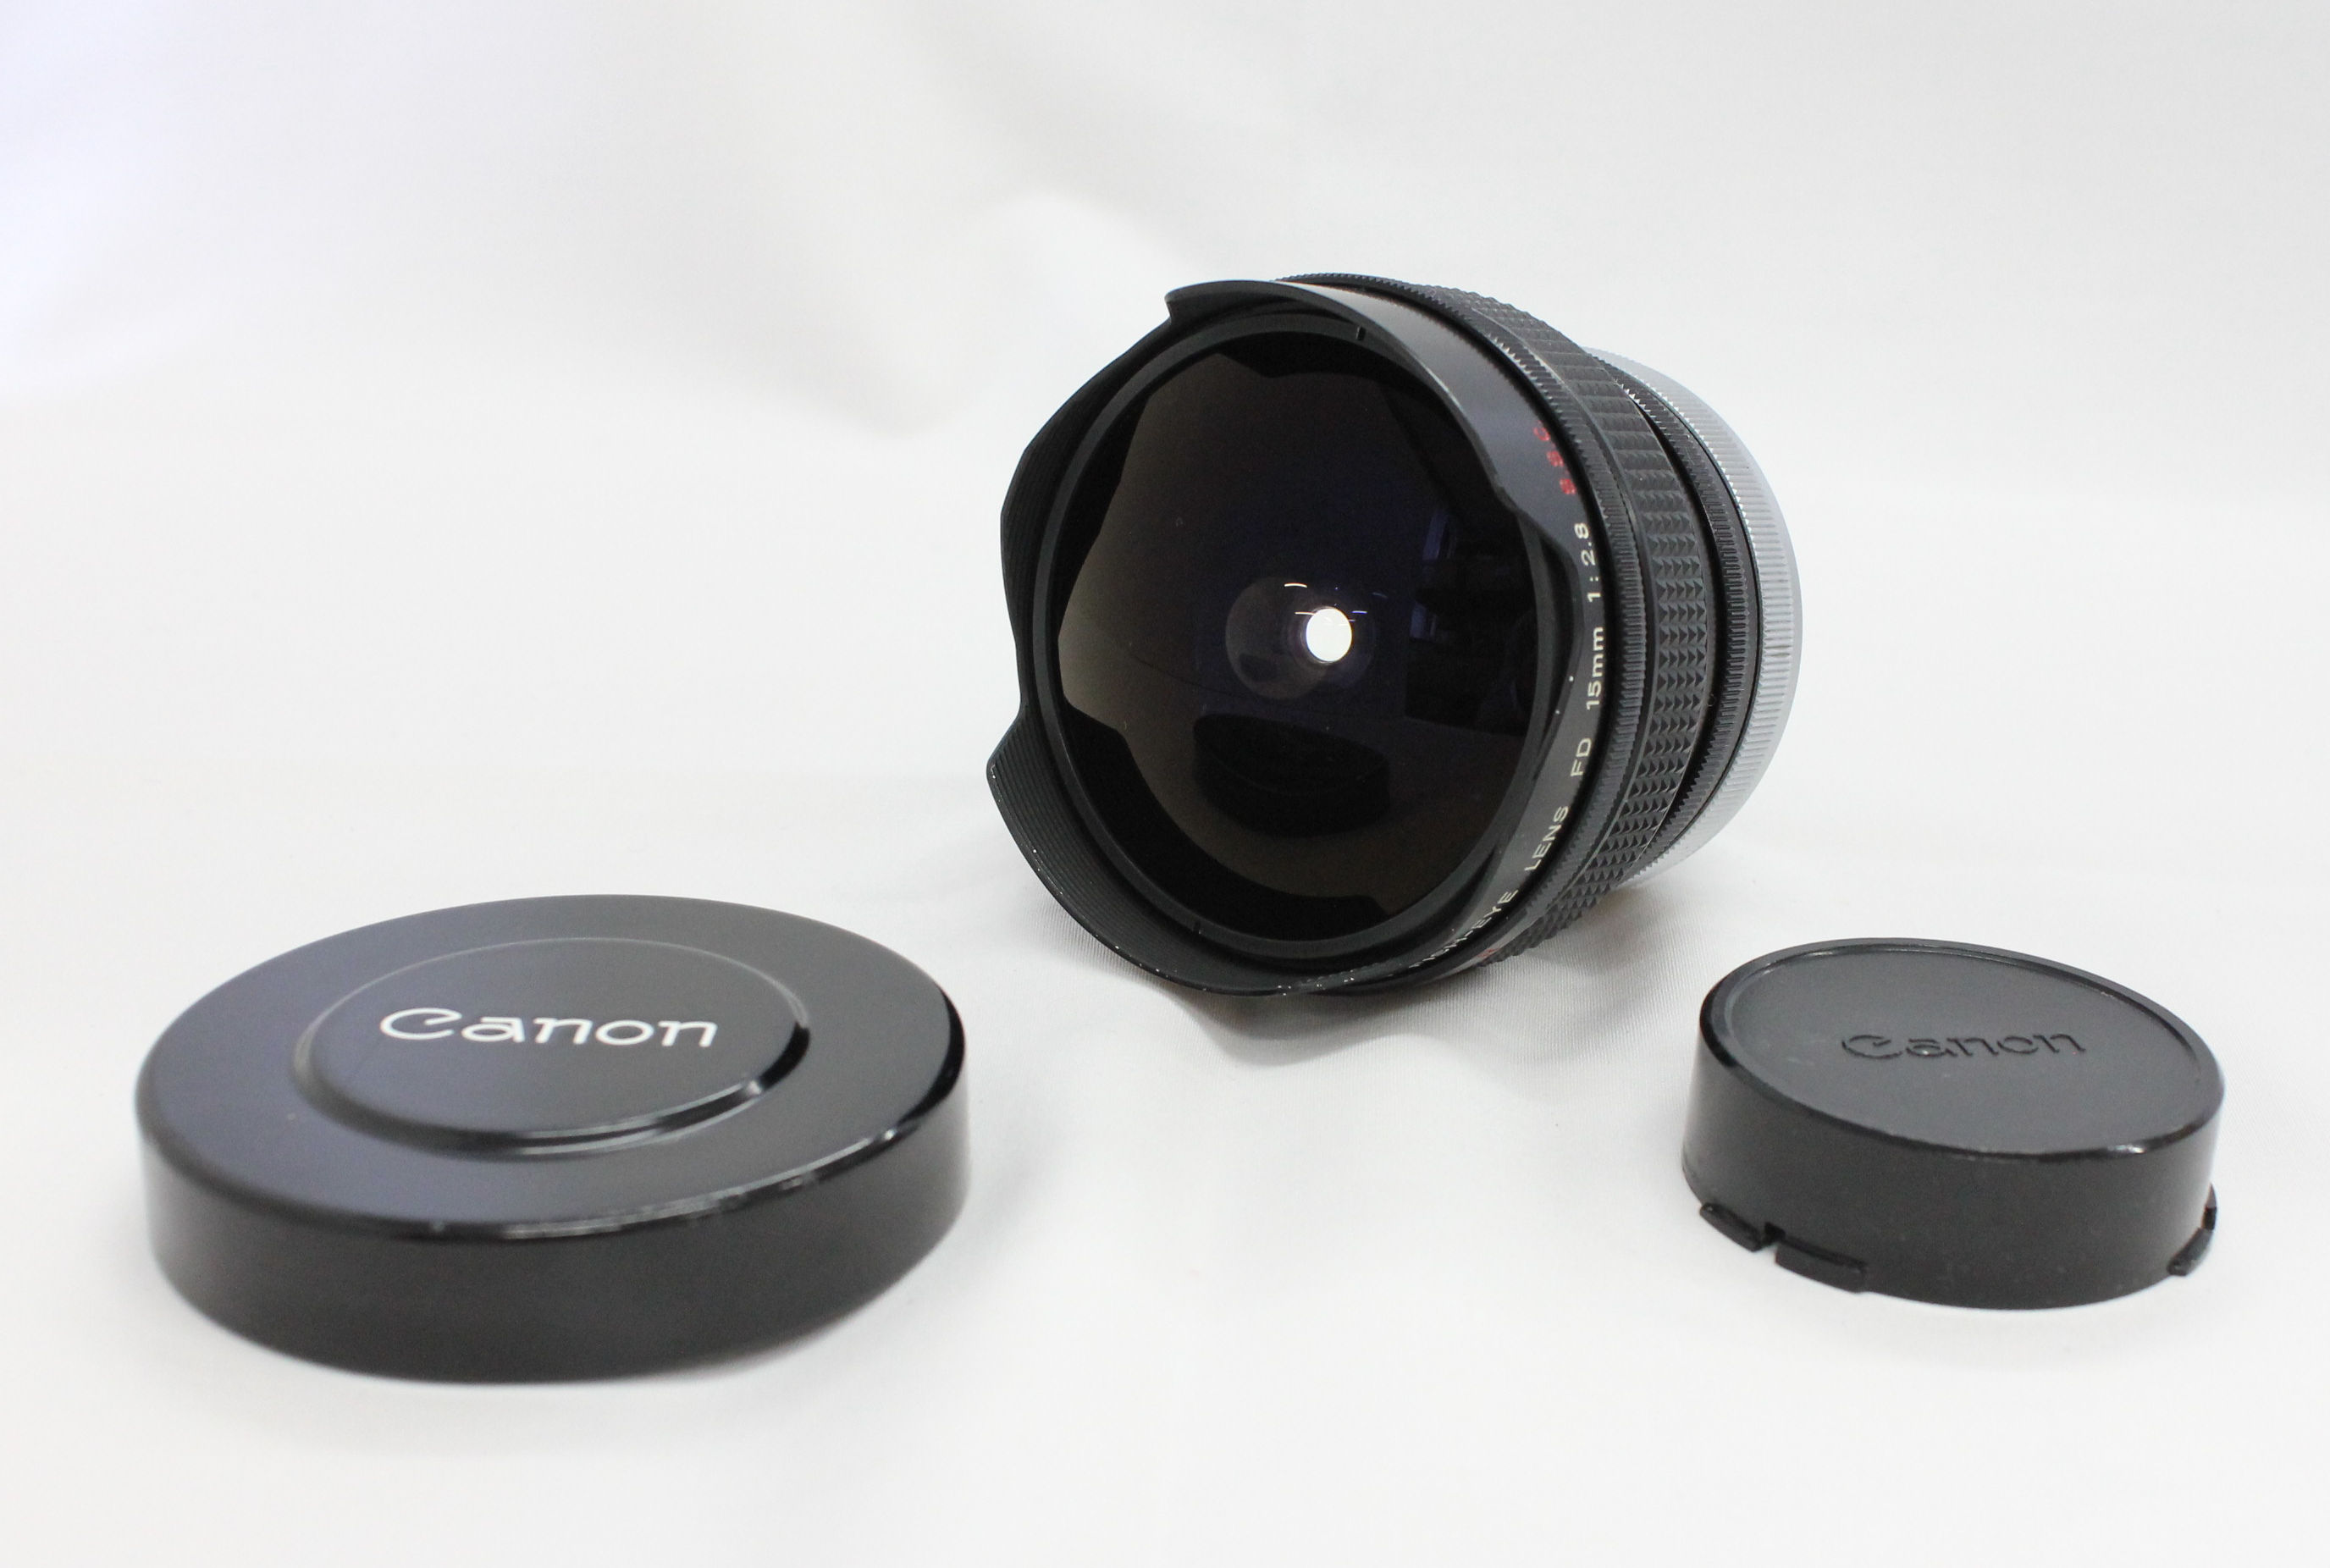 Japan Used Camera Shop | [Near Mint] Canon FD 15mm F/2.8 S.S.C. ssc Fish-eye Lens from Japan